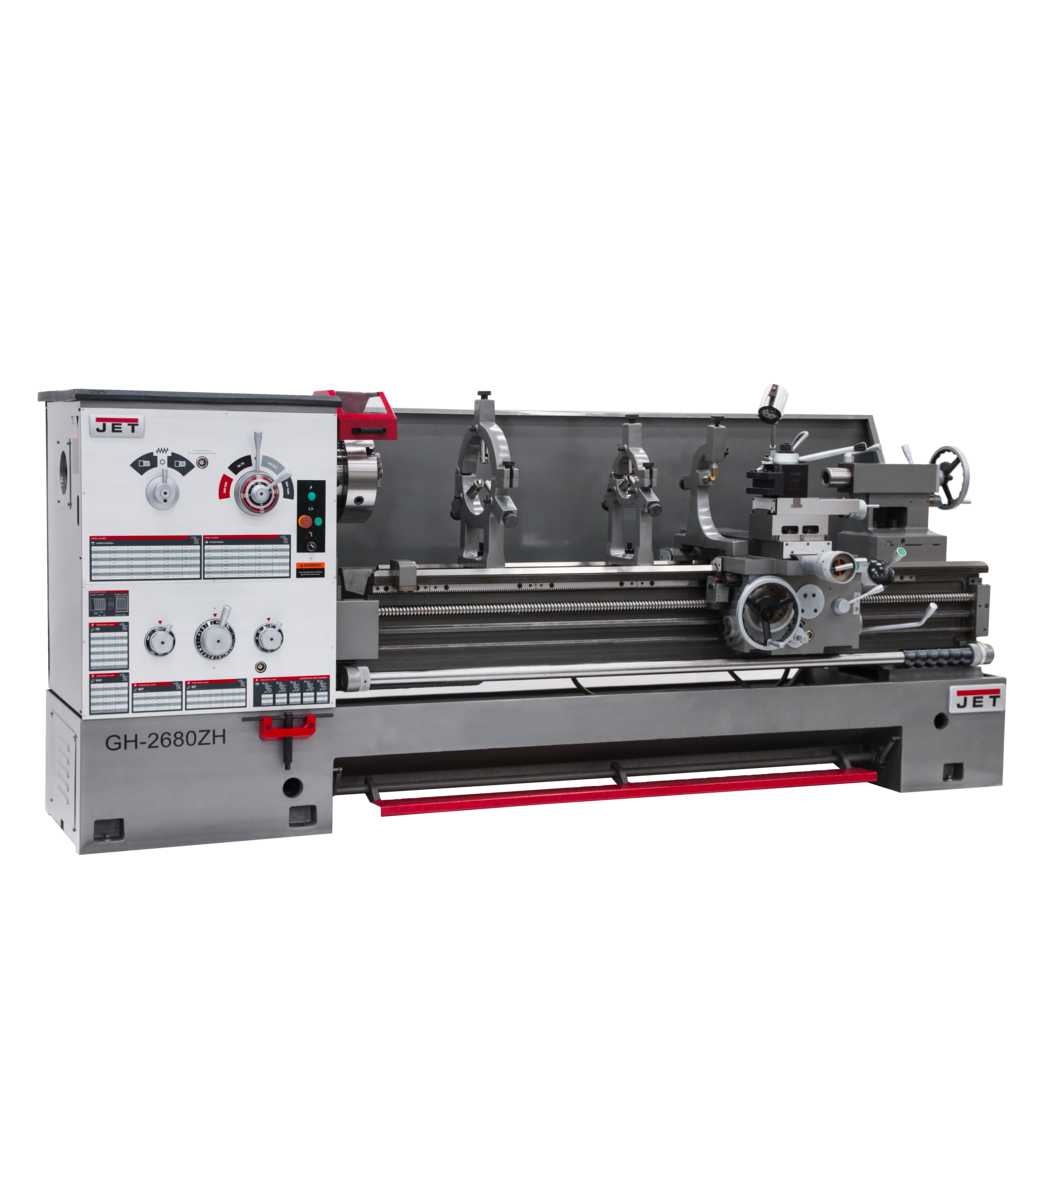 321860, GH-2680ZH , 26" Swing, 80" Between Centers,GH-2680ZH, 4-1/8" Spindle Bore Geared Head Lathe, Jet, Metalworking, Turning, Lathes